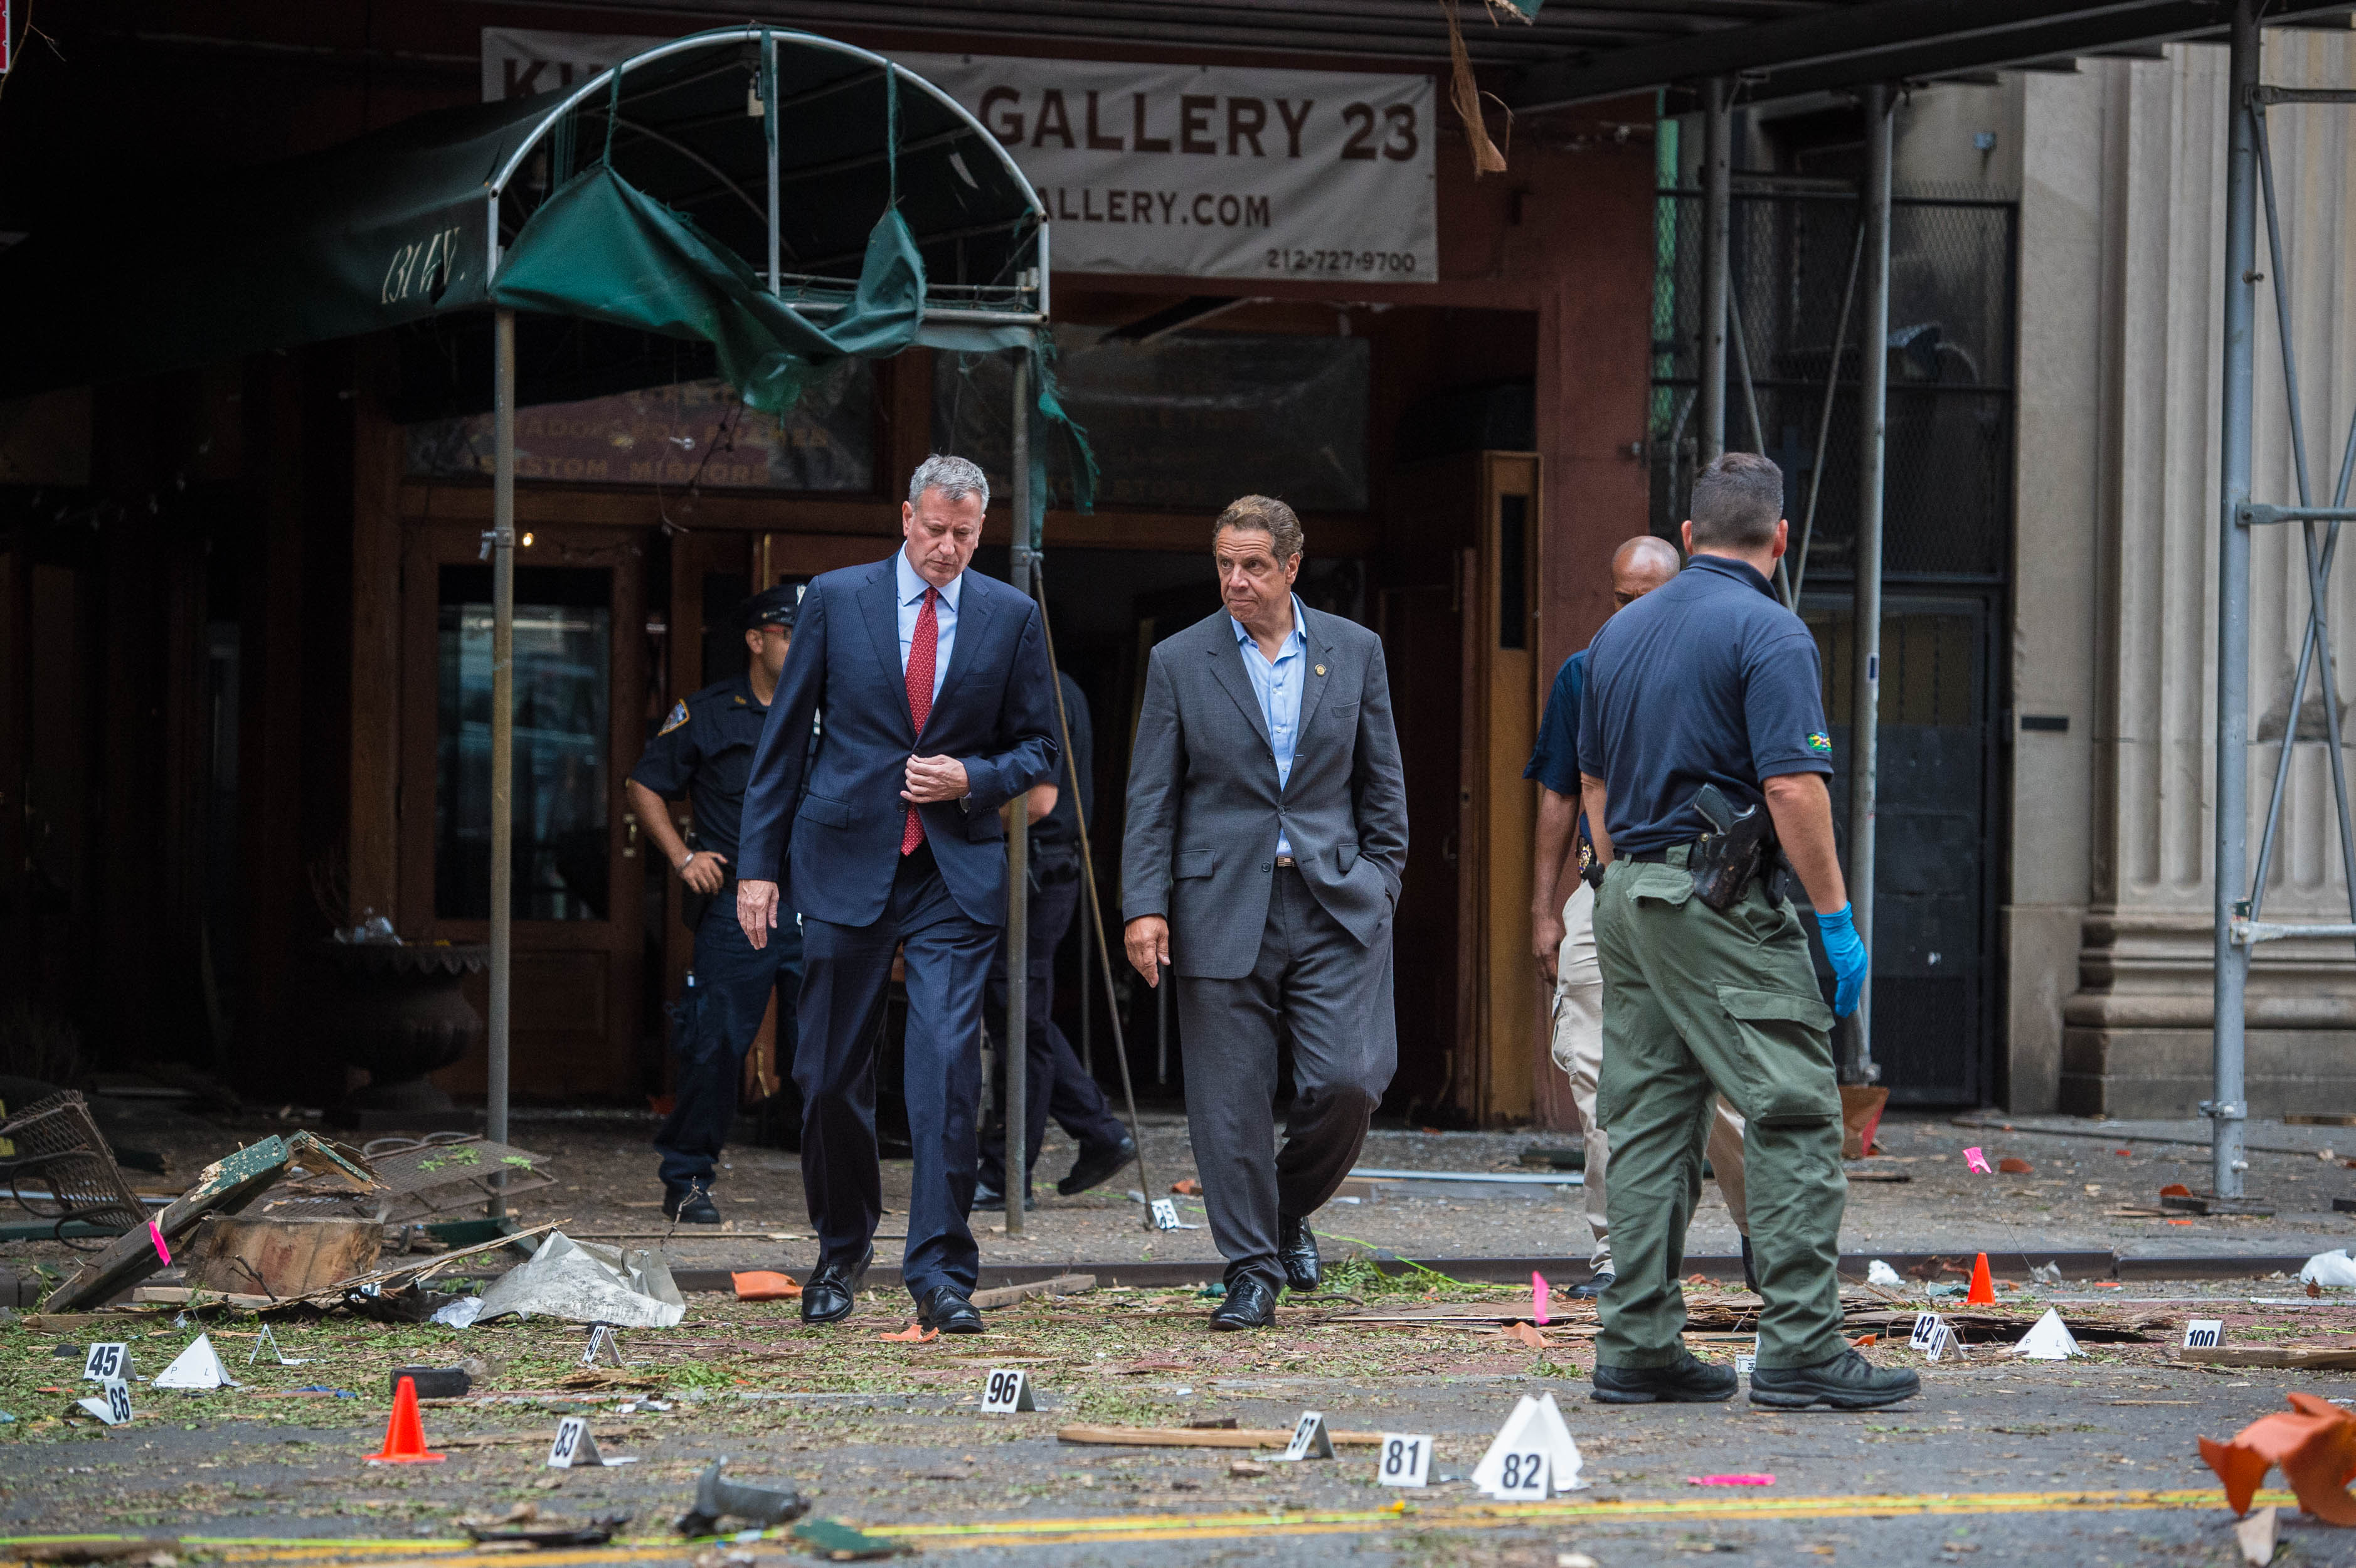 Sunday morning, Mayor de Blasio and Governor Cuomo inspected the scene outside 131 W. 23rd St., the site of the previous night’s explosion. Photo by Michael Appleton, Mayoral Photography Office.